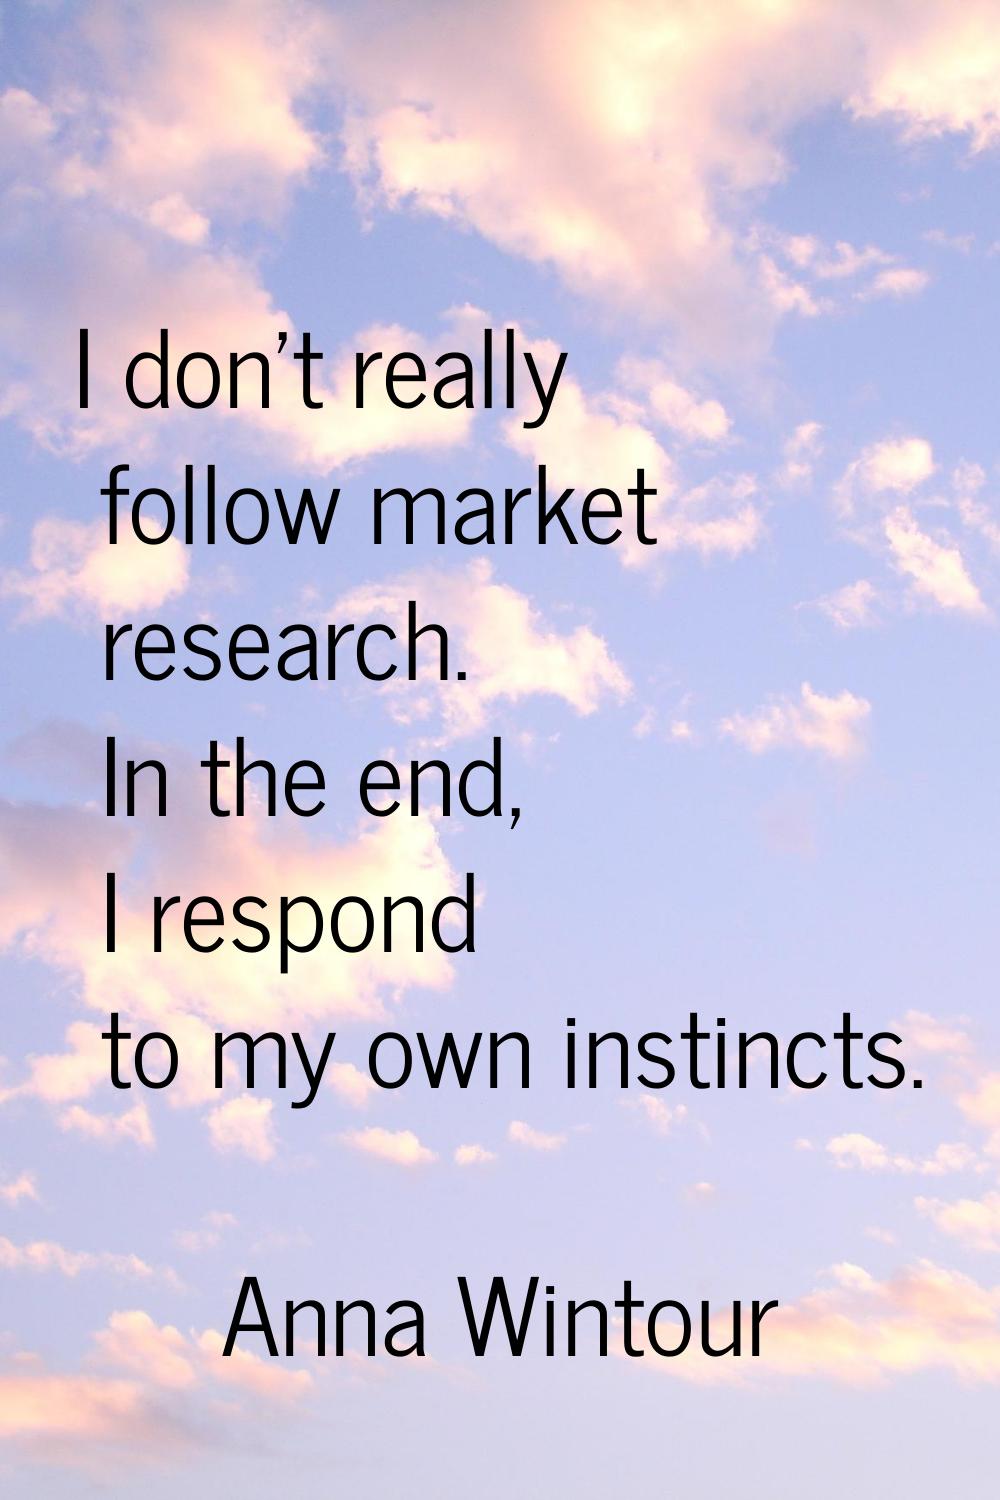 I don't really follow market research. In the end, I respond to my own instincts.